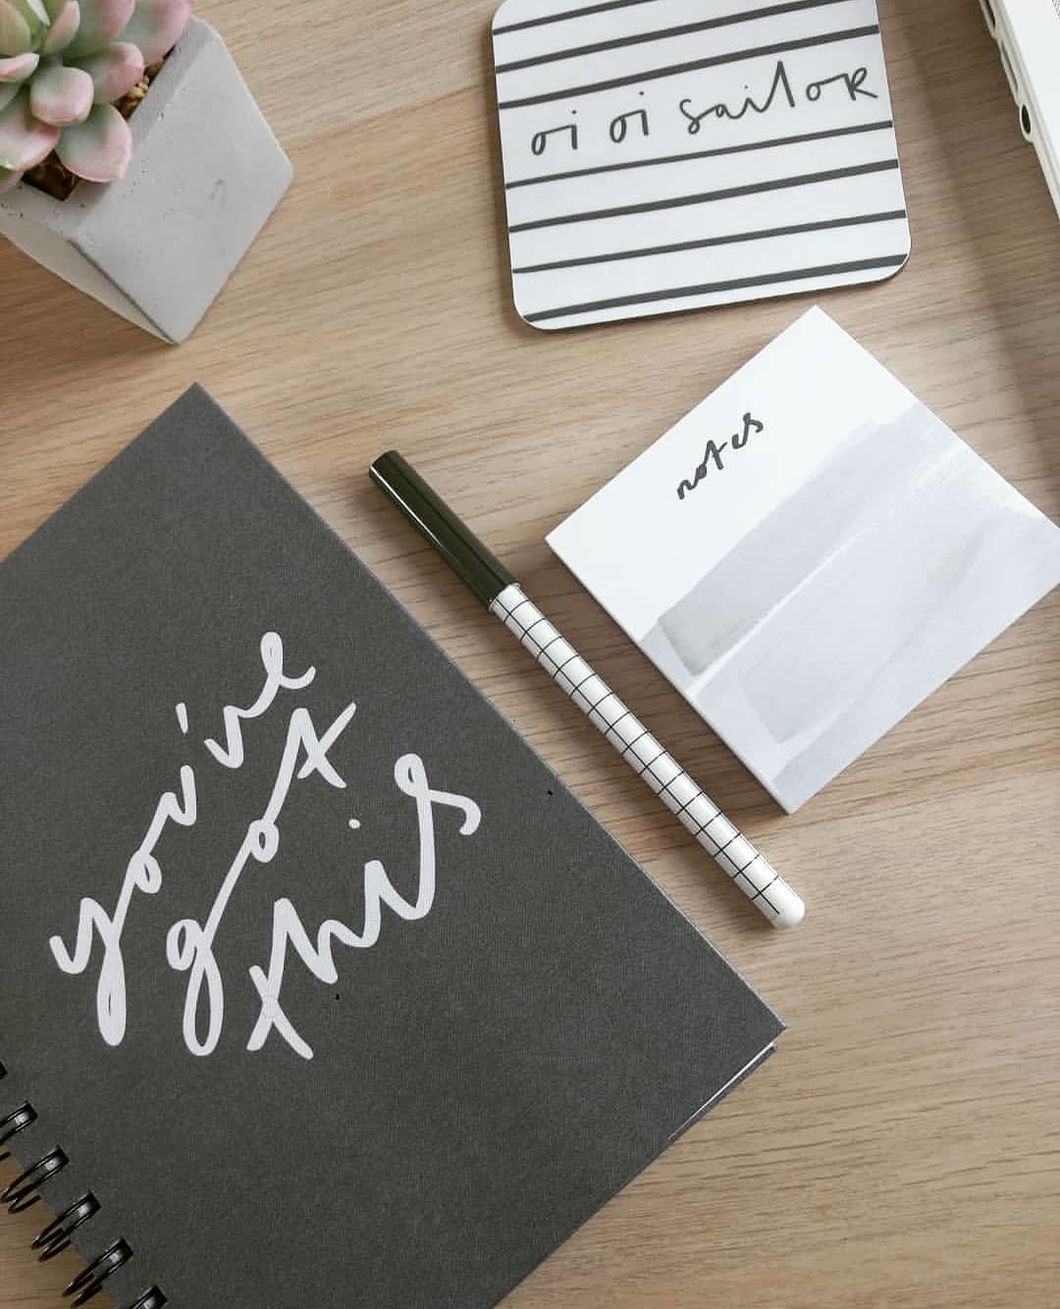 9 Tips On Being Organized For The Year That Will Set You Up For Success